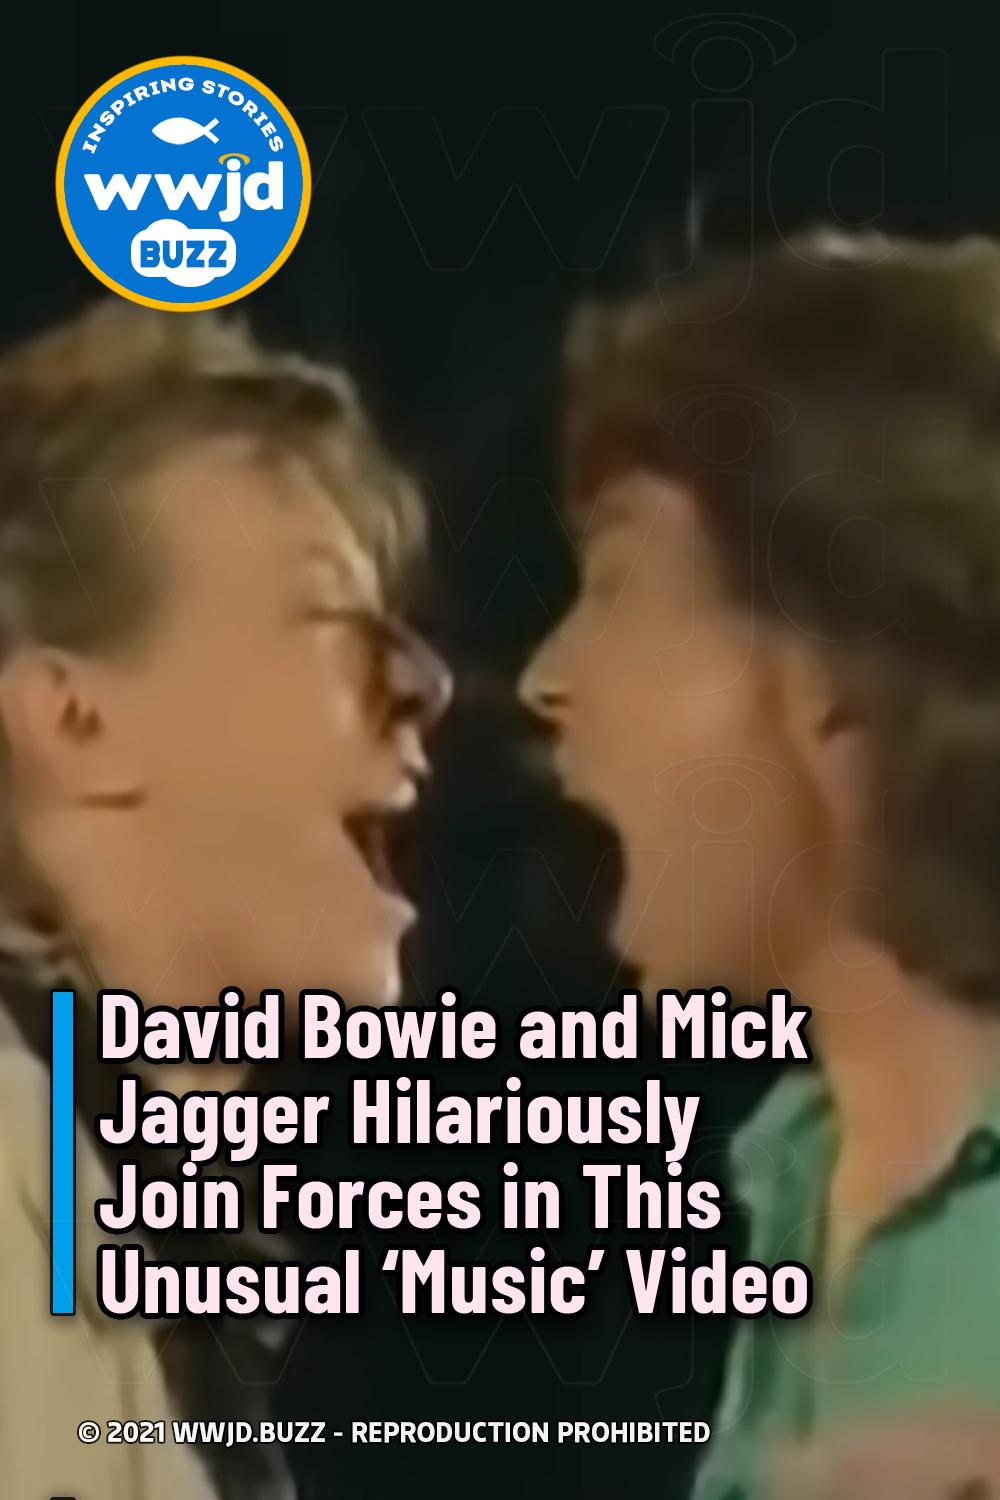 David Bowie and Mick Jagger Hilariously Join Forces in This Unusual \'Music\' Video